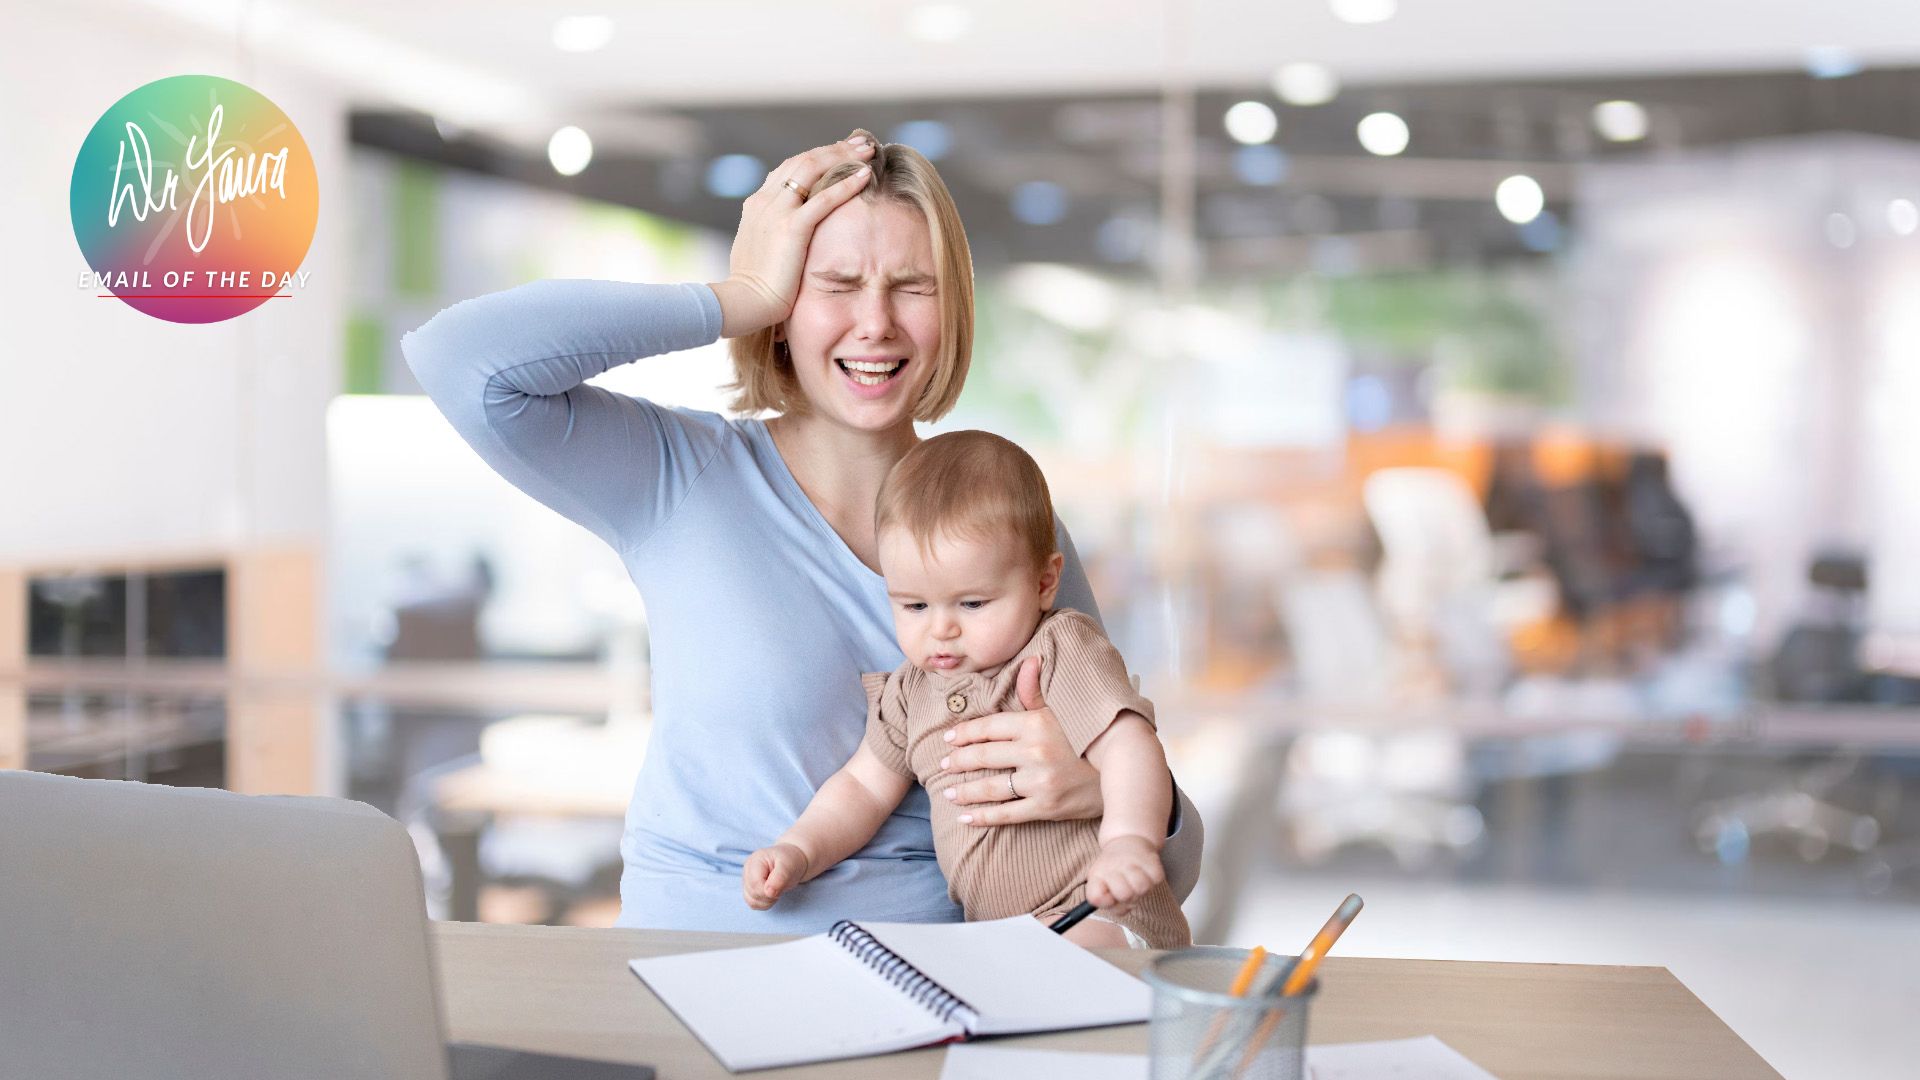 Woman in blue shirt closes eyes and holds head in one hand while holding baby in beige onesie, sitting at a table with a notebook in front of her